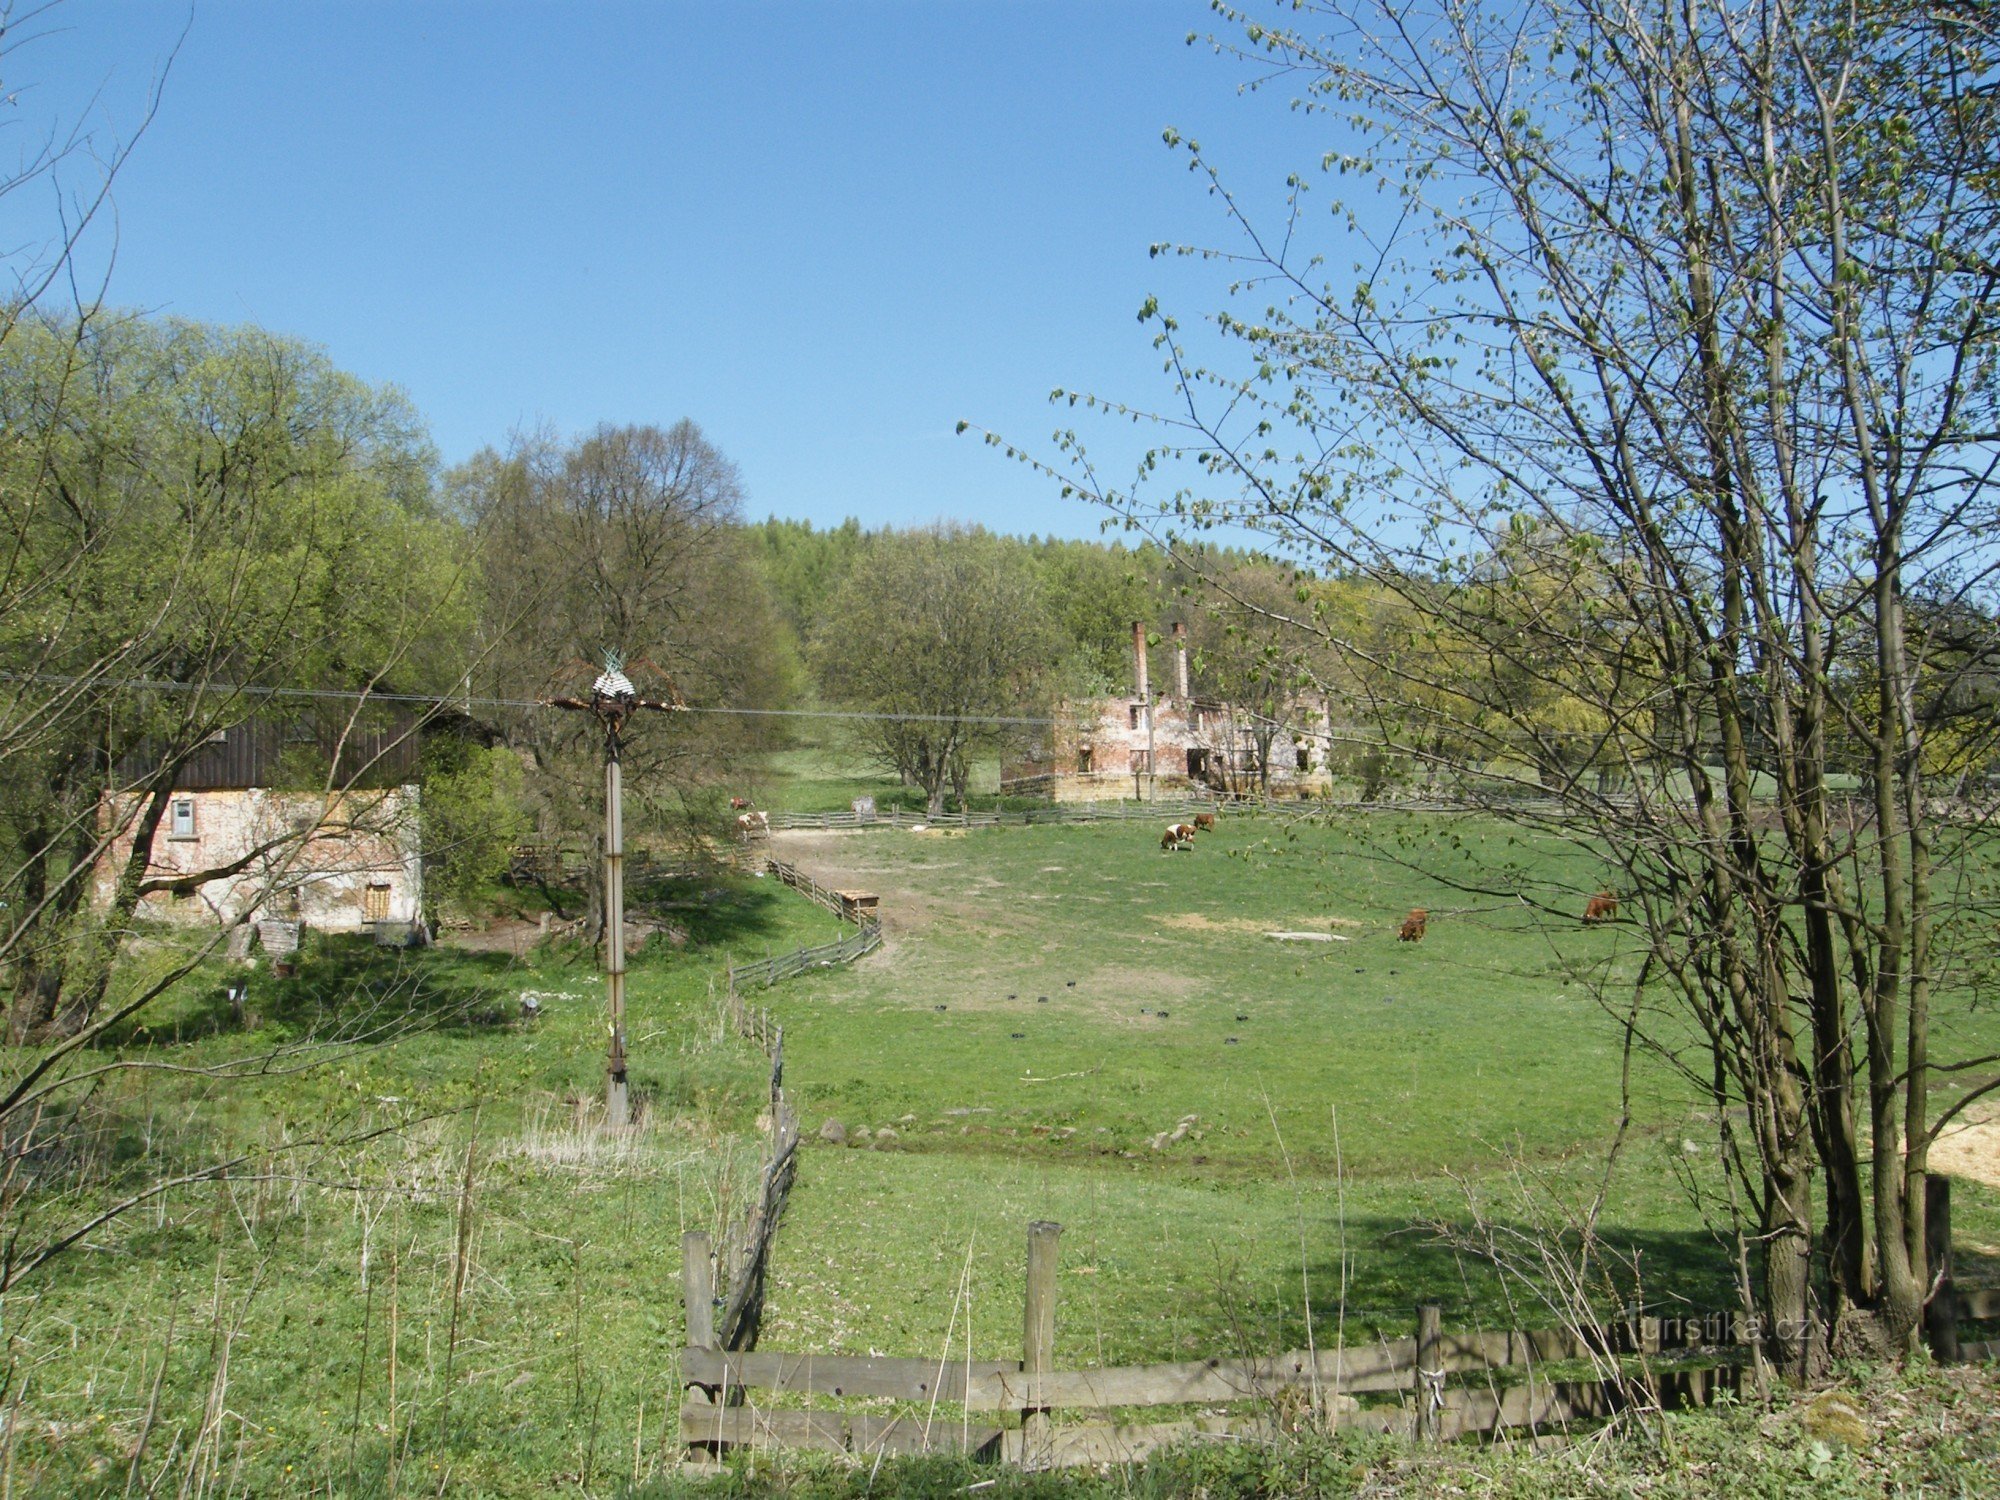 Libná - the remains of the former village